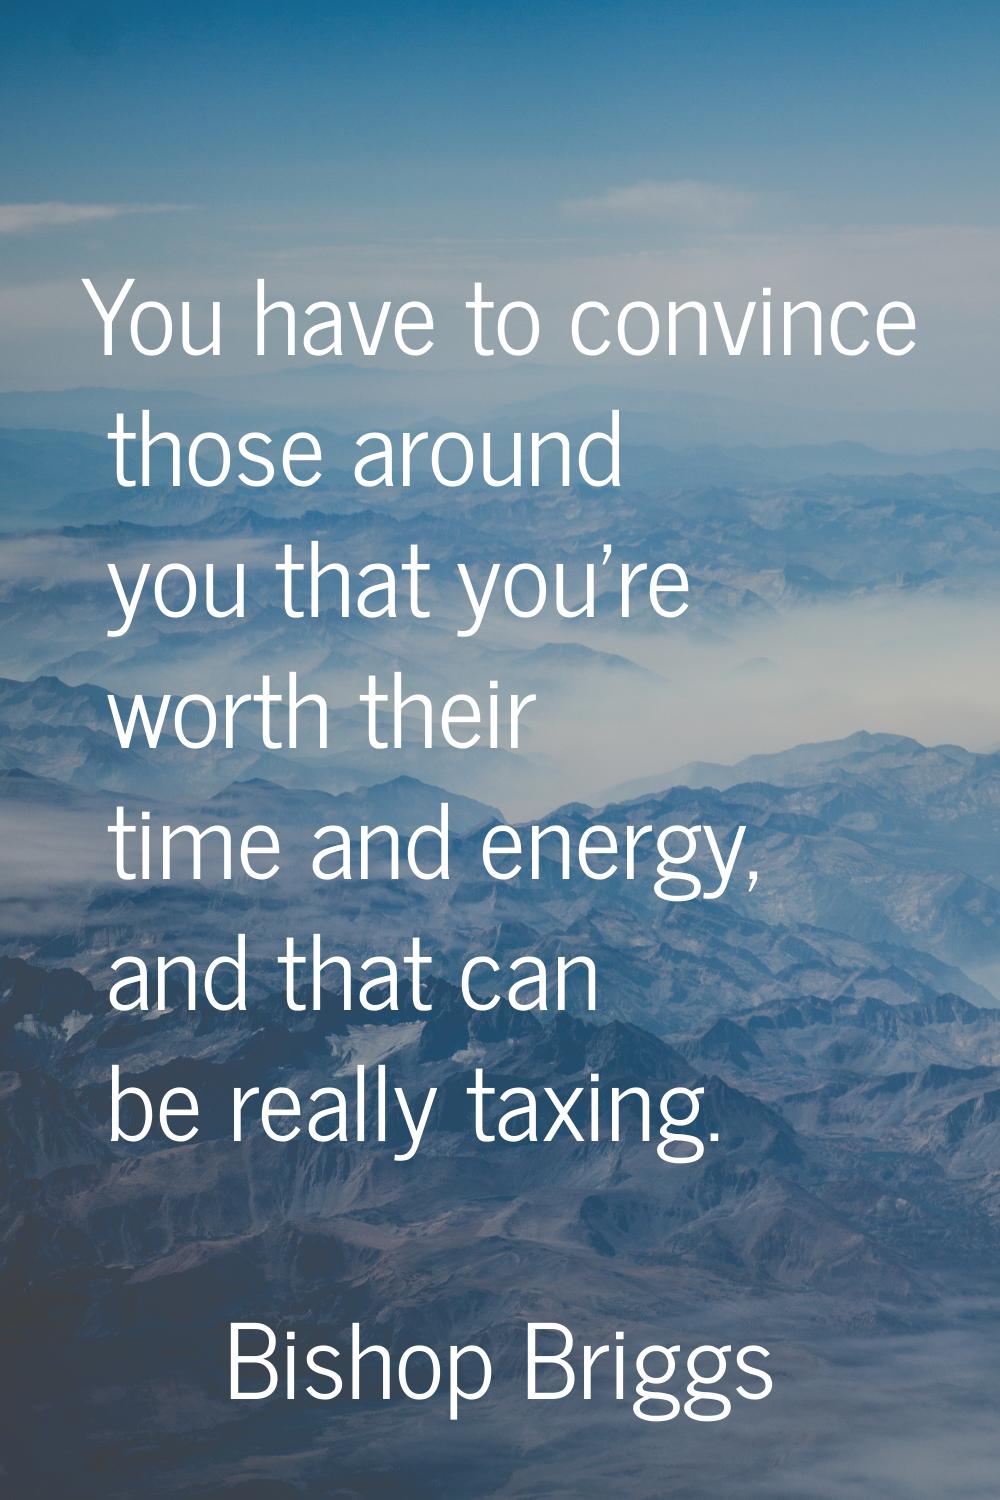 You have to convince those around you that you're worth their time and energy, and that can be real